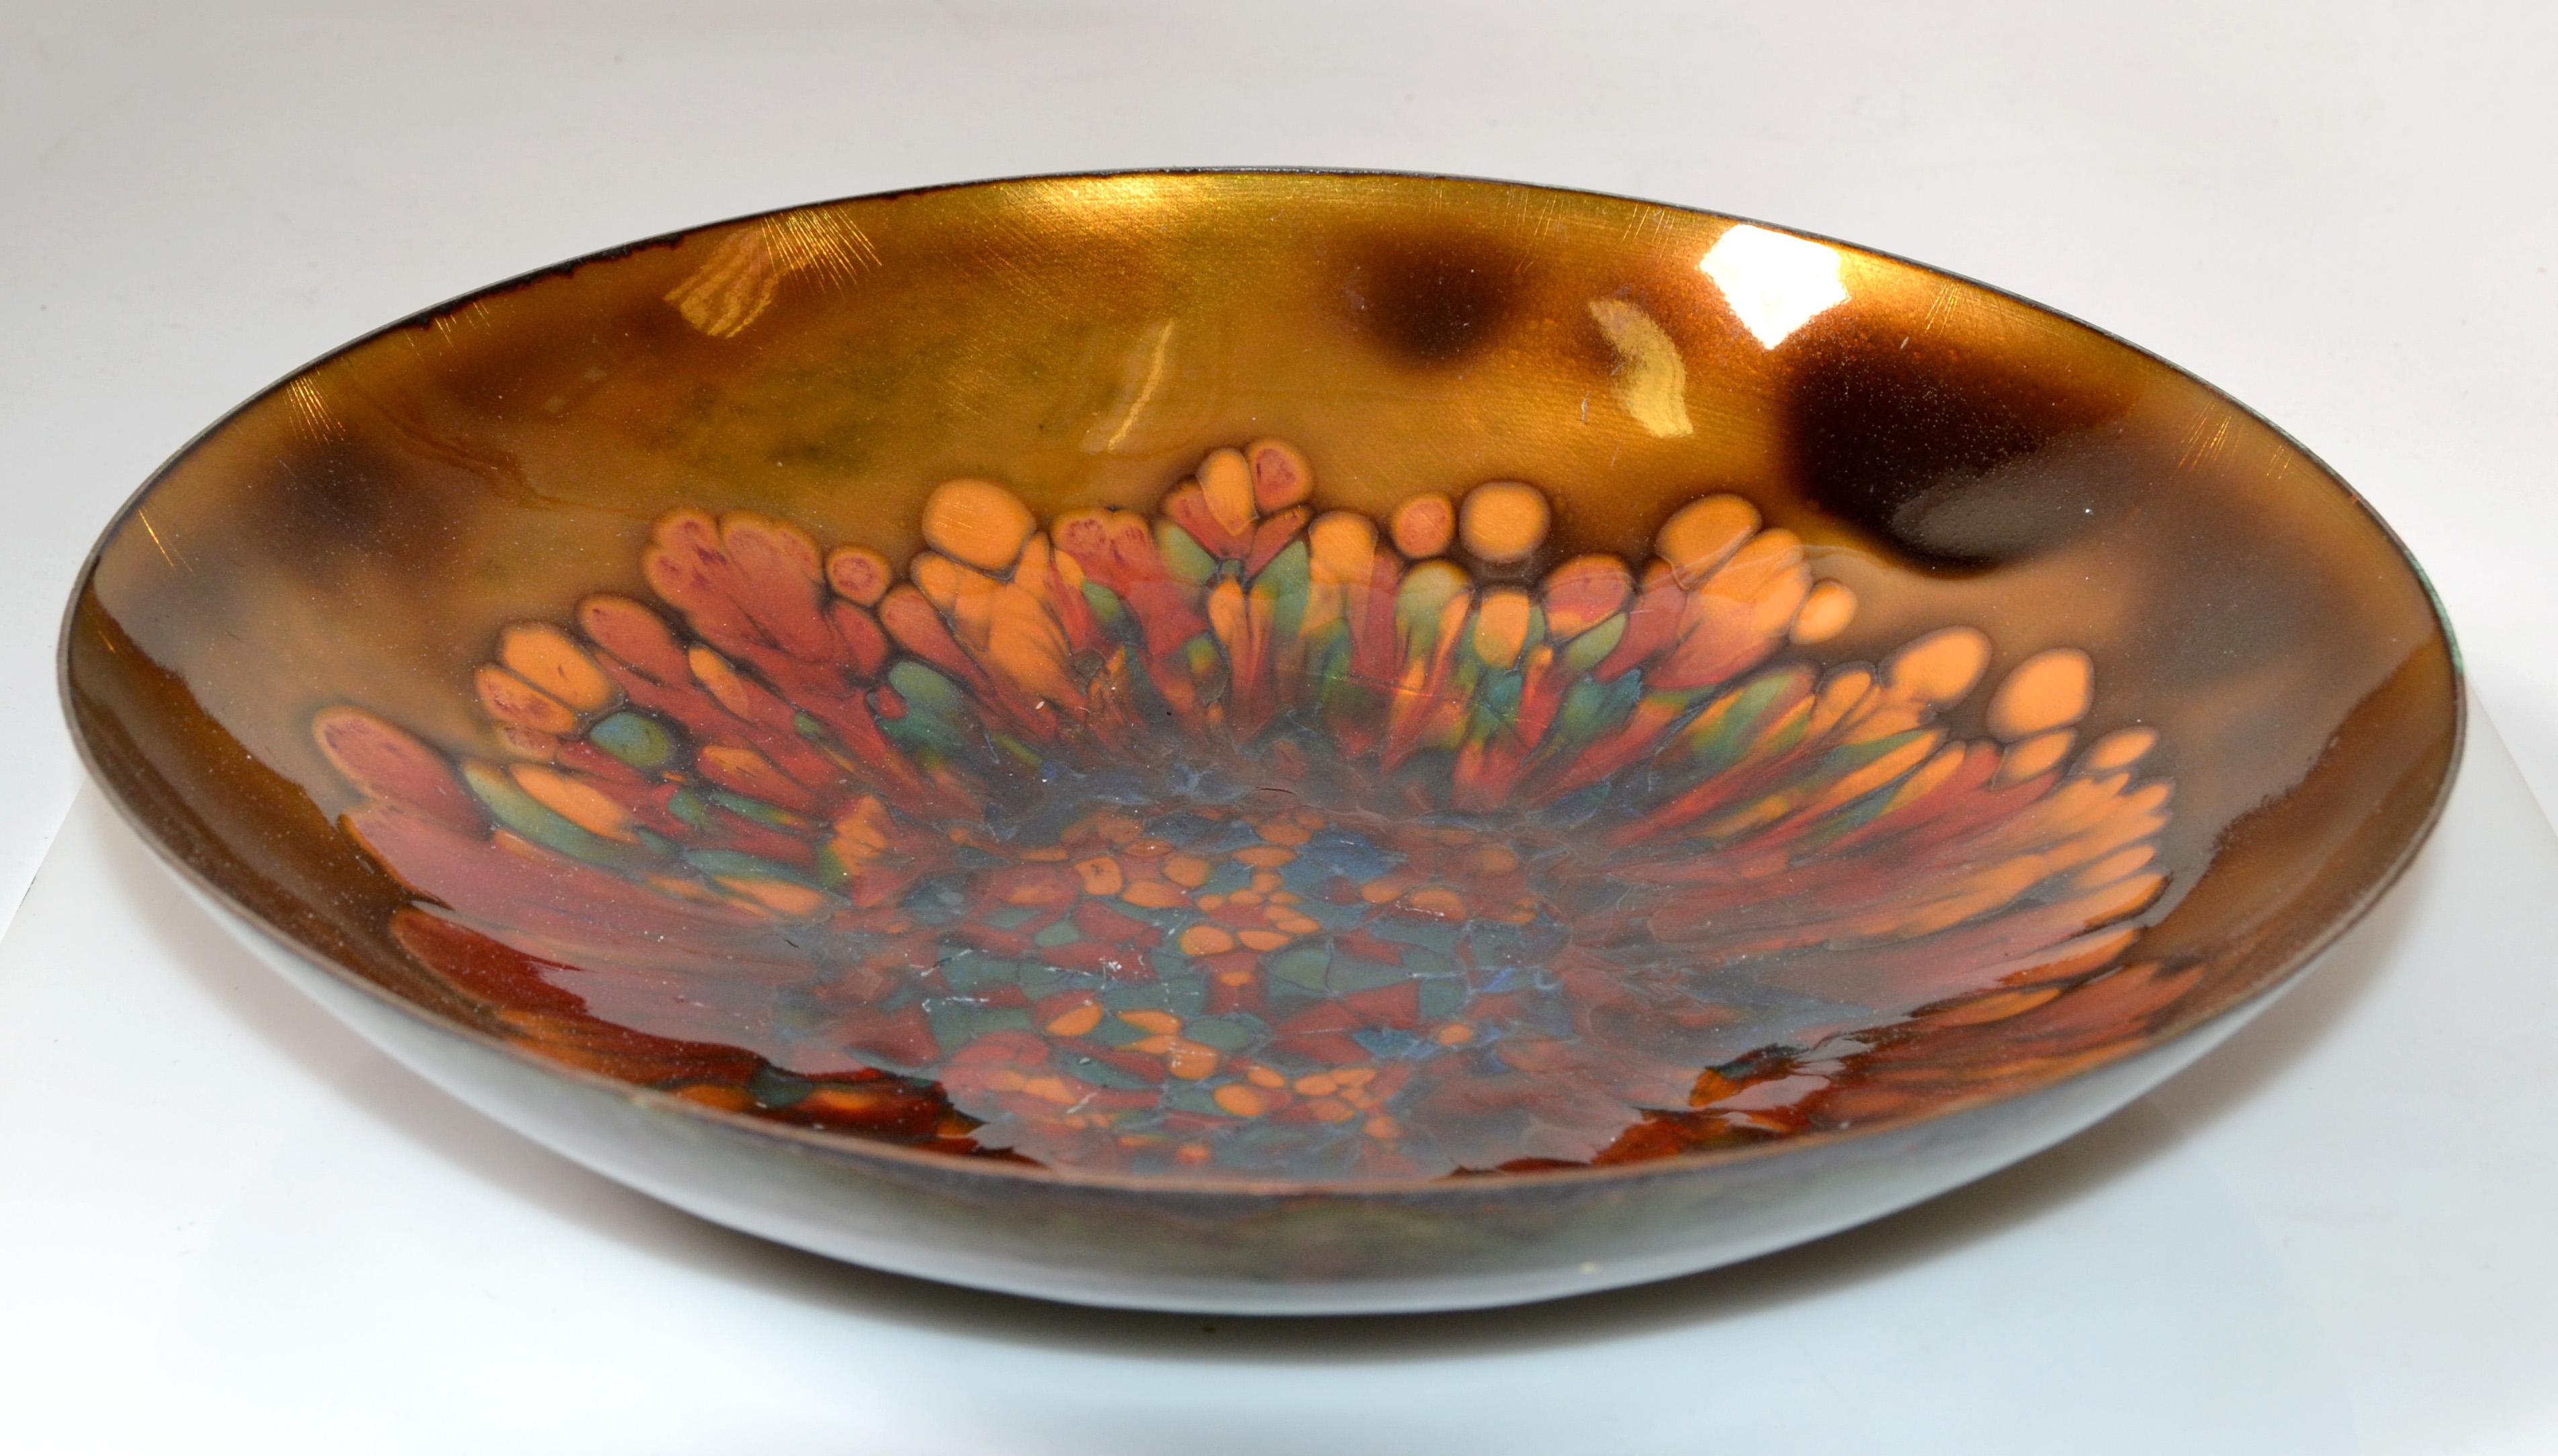 Vintage Kareka Enamel over Copper hammered decorative plate, centerpiece, bowl.
Beautifully crafted in hues of orange, brown and green colors.
Marked and Foil Label at the Base.